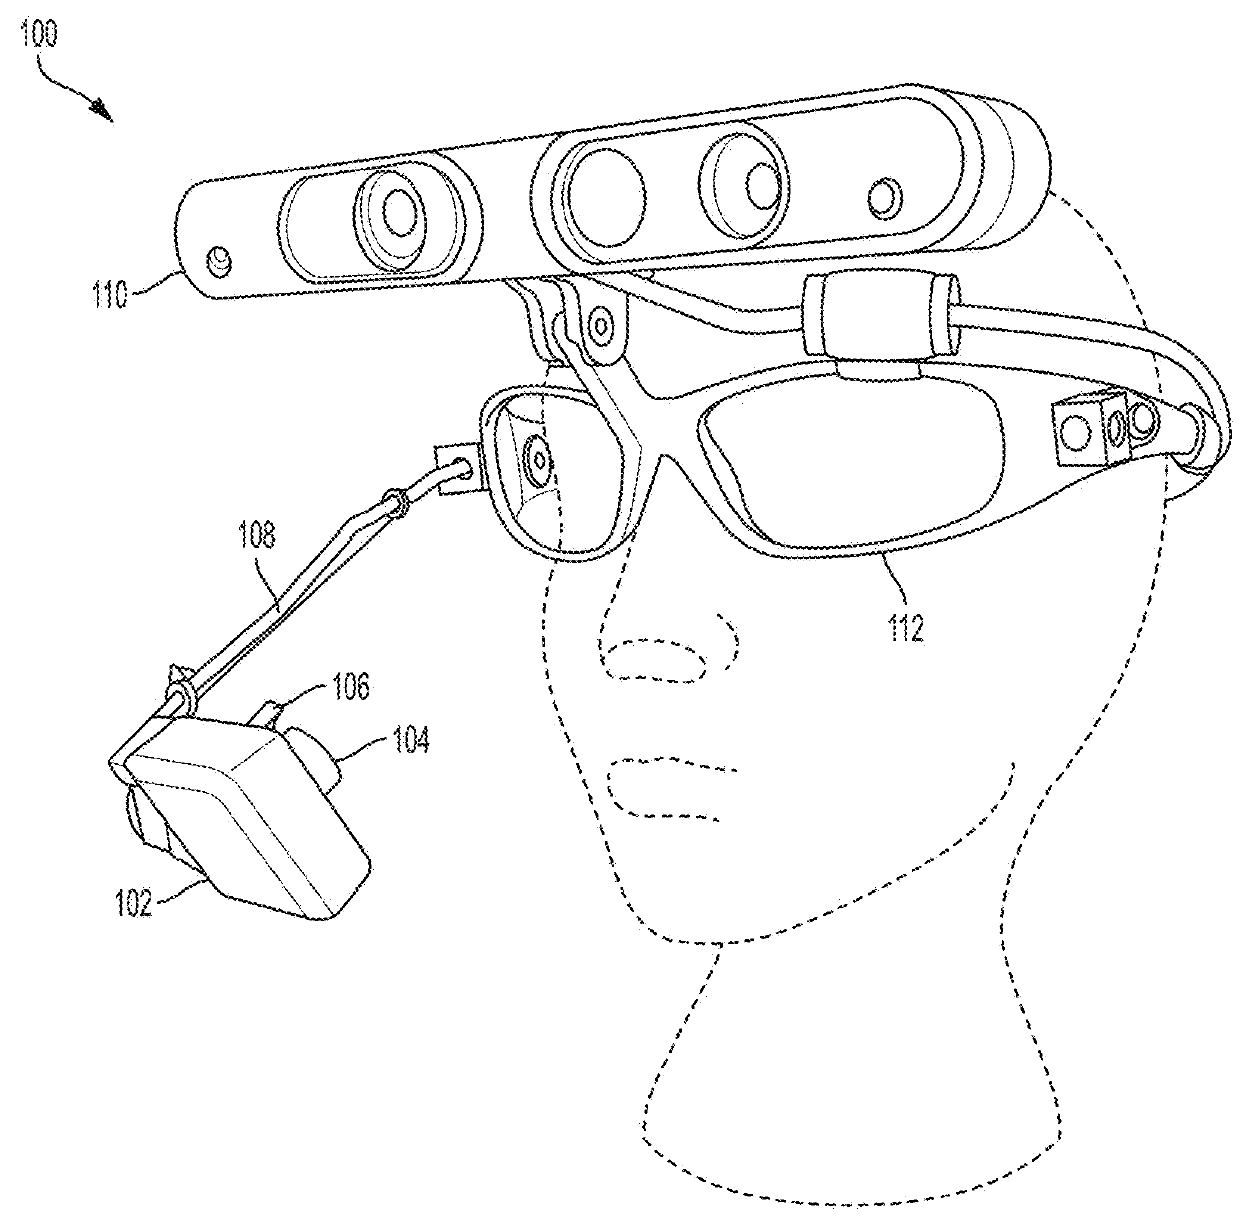 Apparatus, system, and method for mobile, low-cost headset for 3D point of gaze estimation